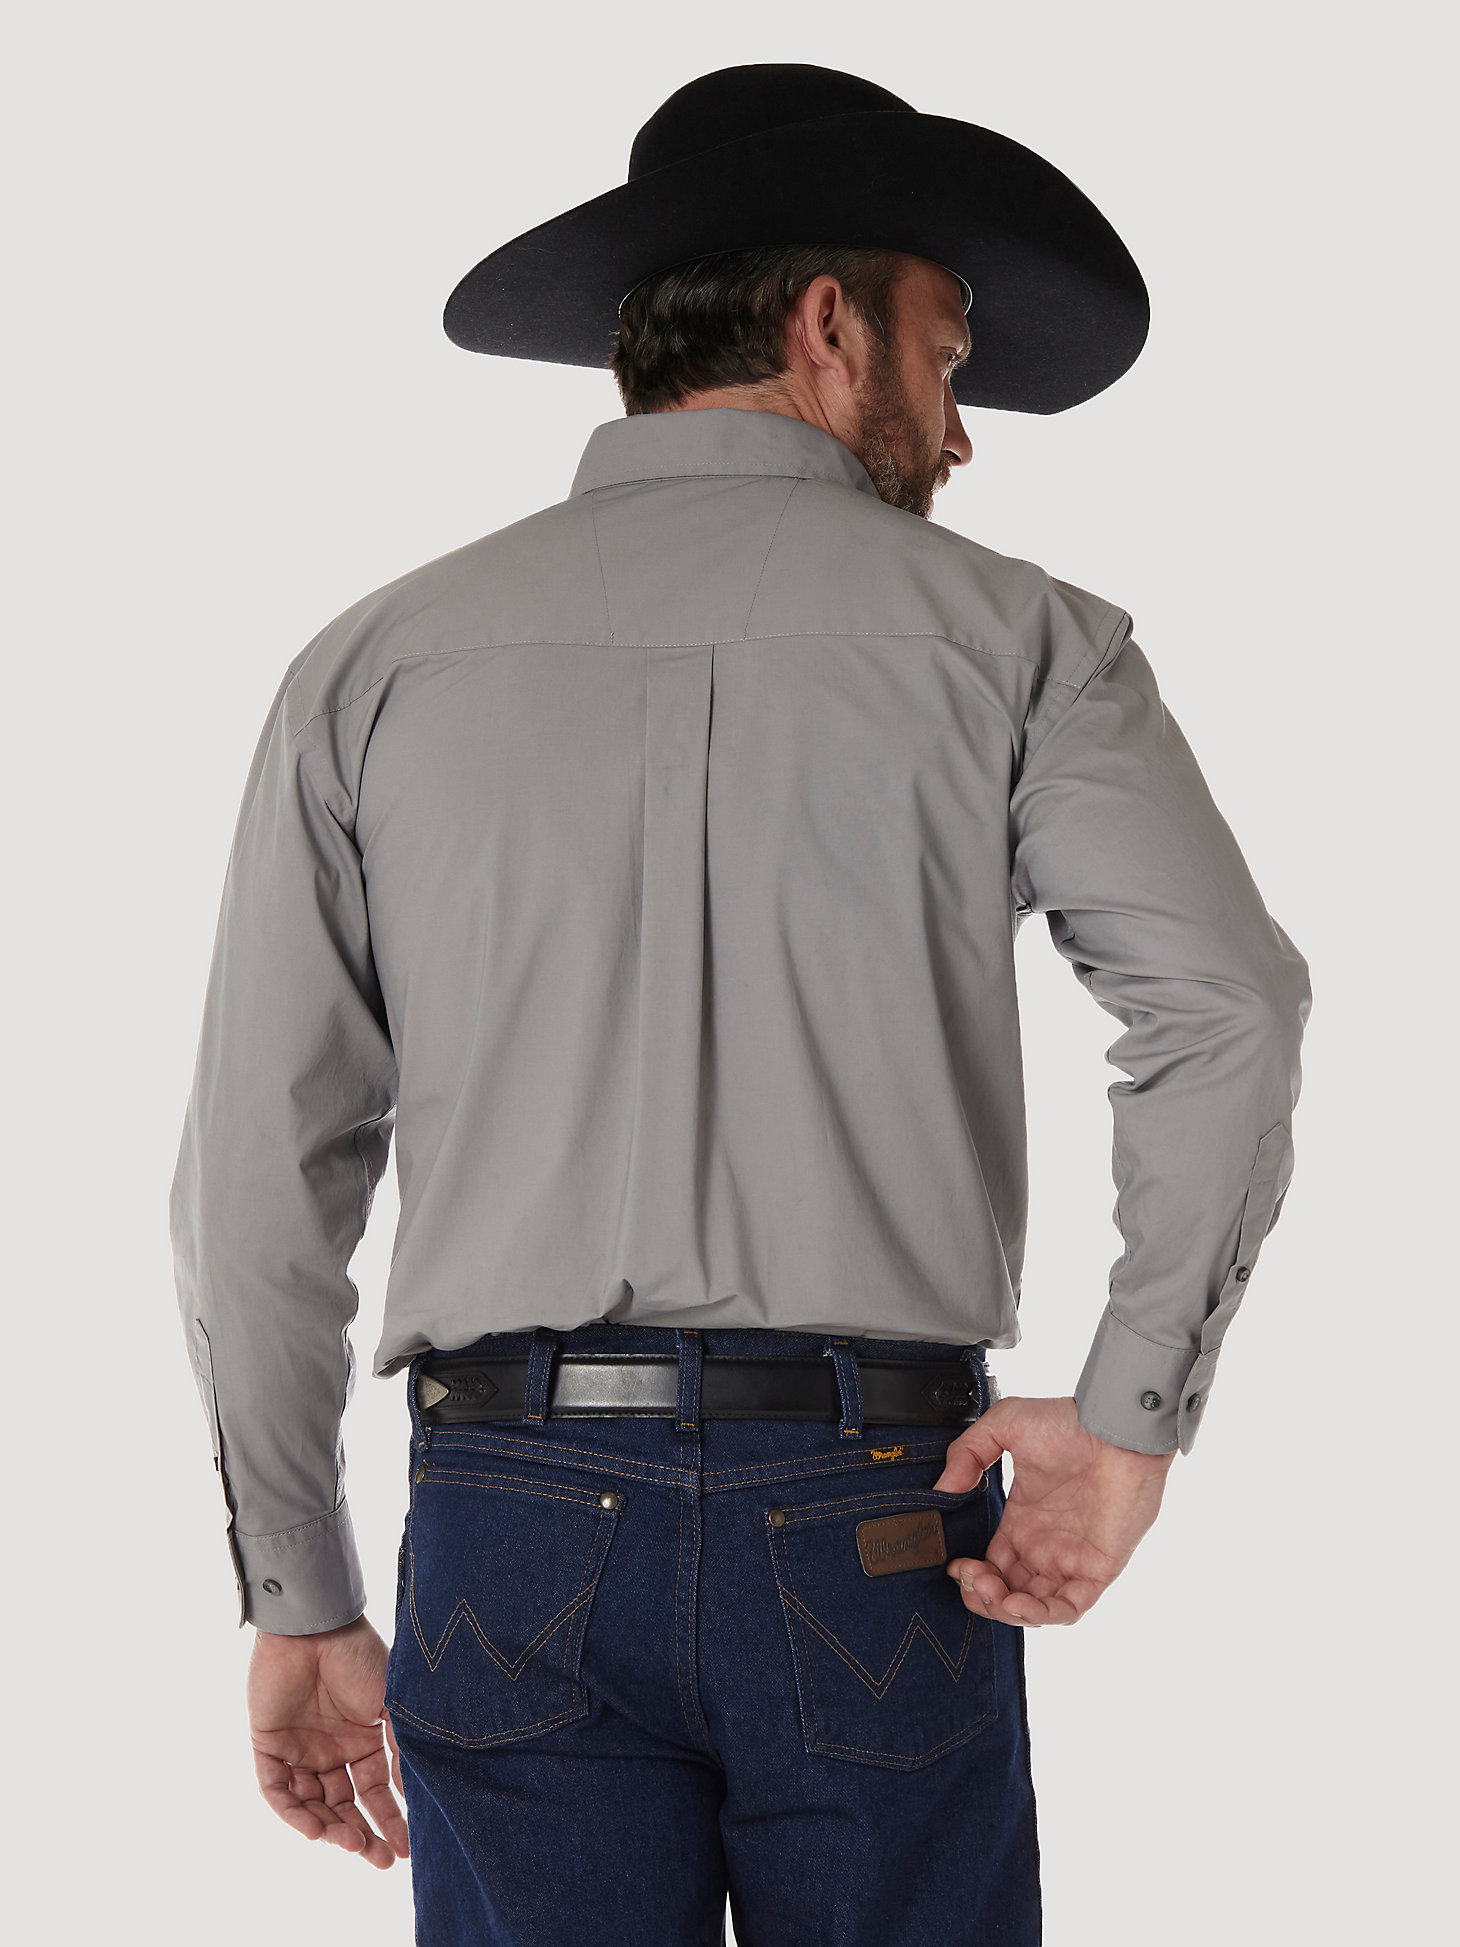 Men's George Strait Long Sleeve Button Down Solid Shirt in Grey alternative view 1